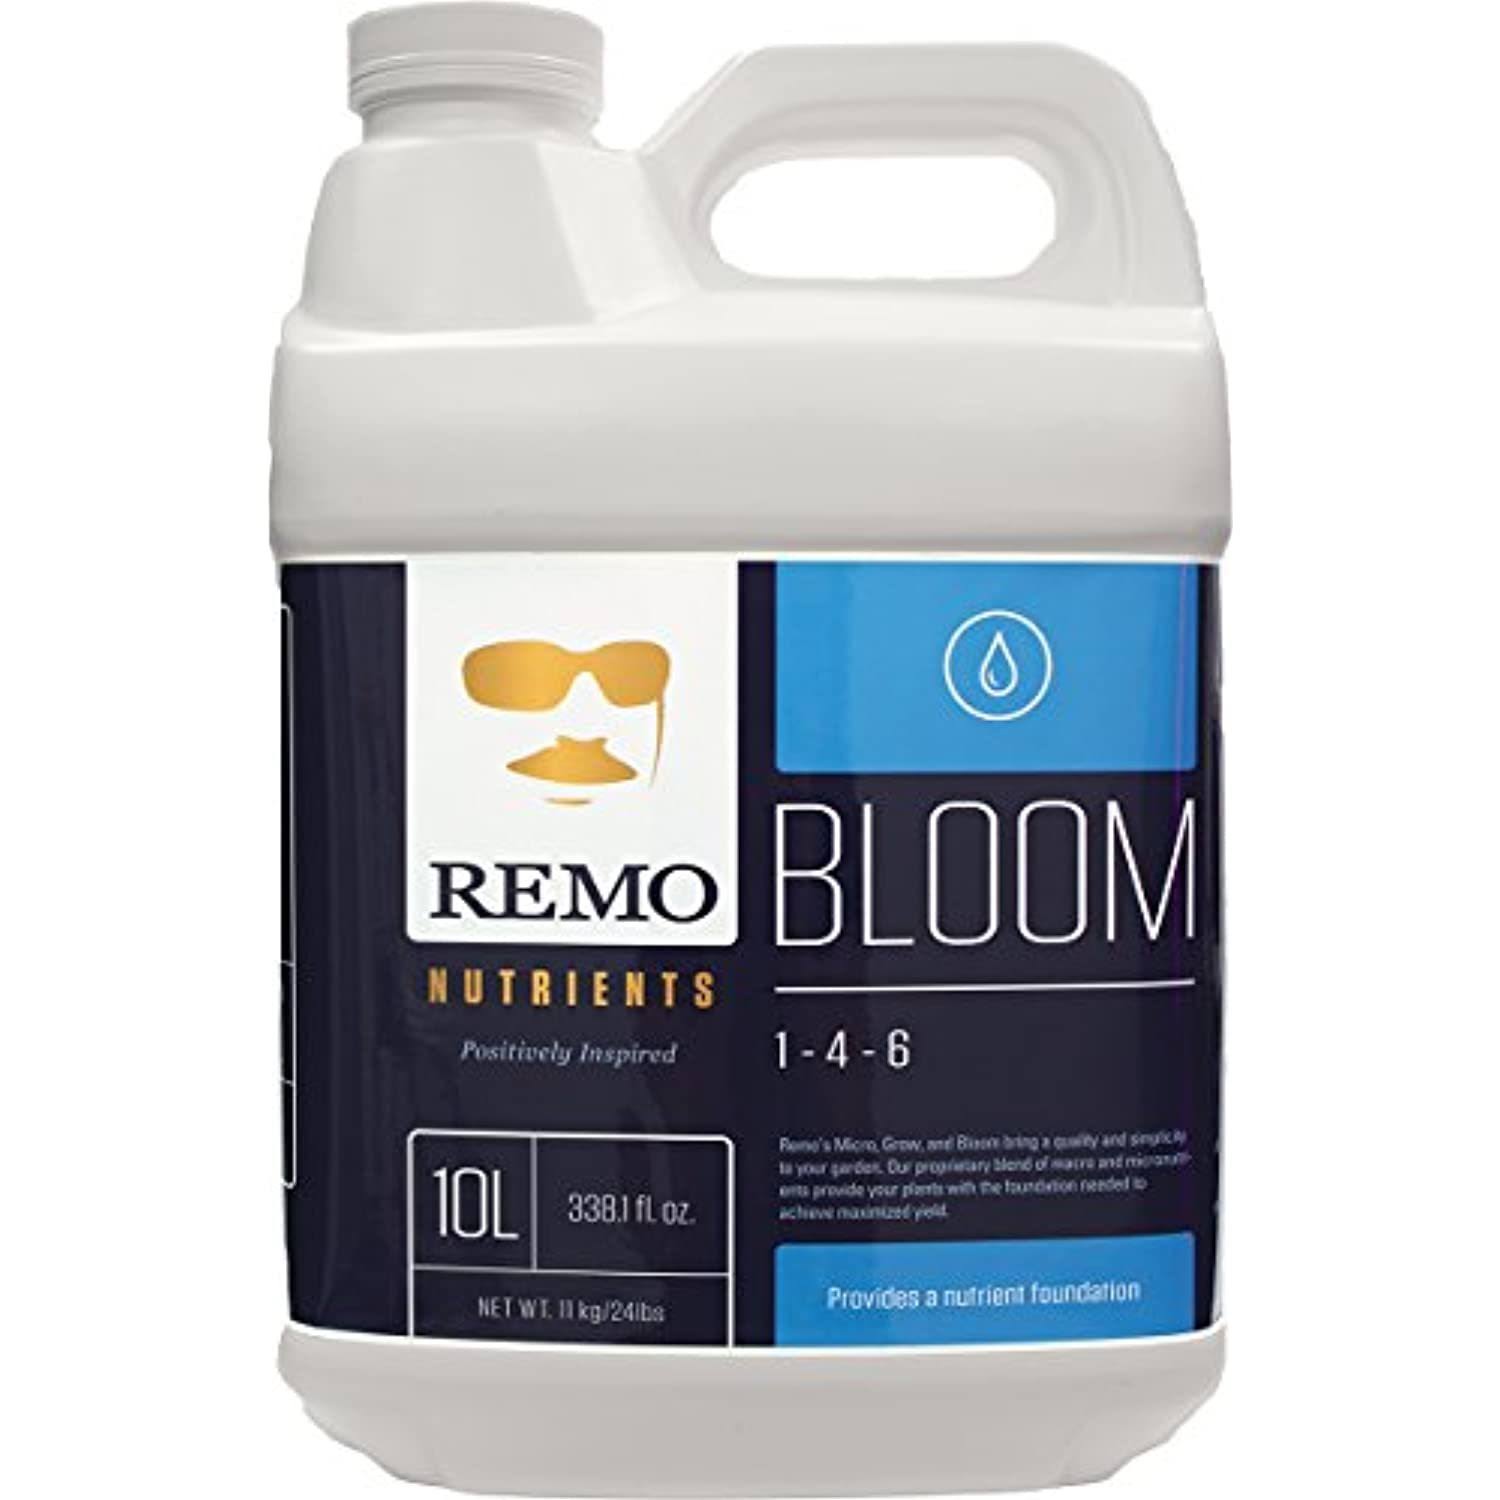 Remo Nutrients Bloom - 10L